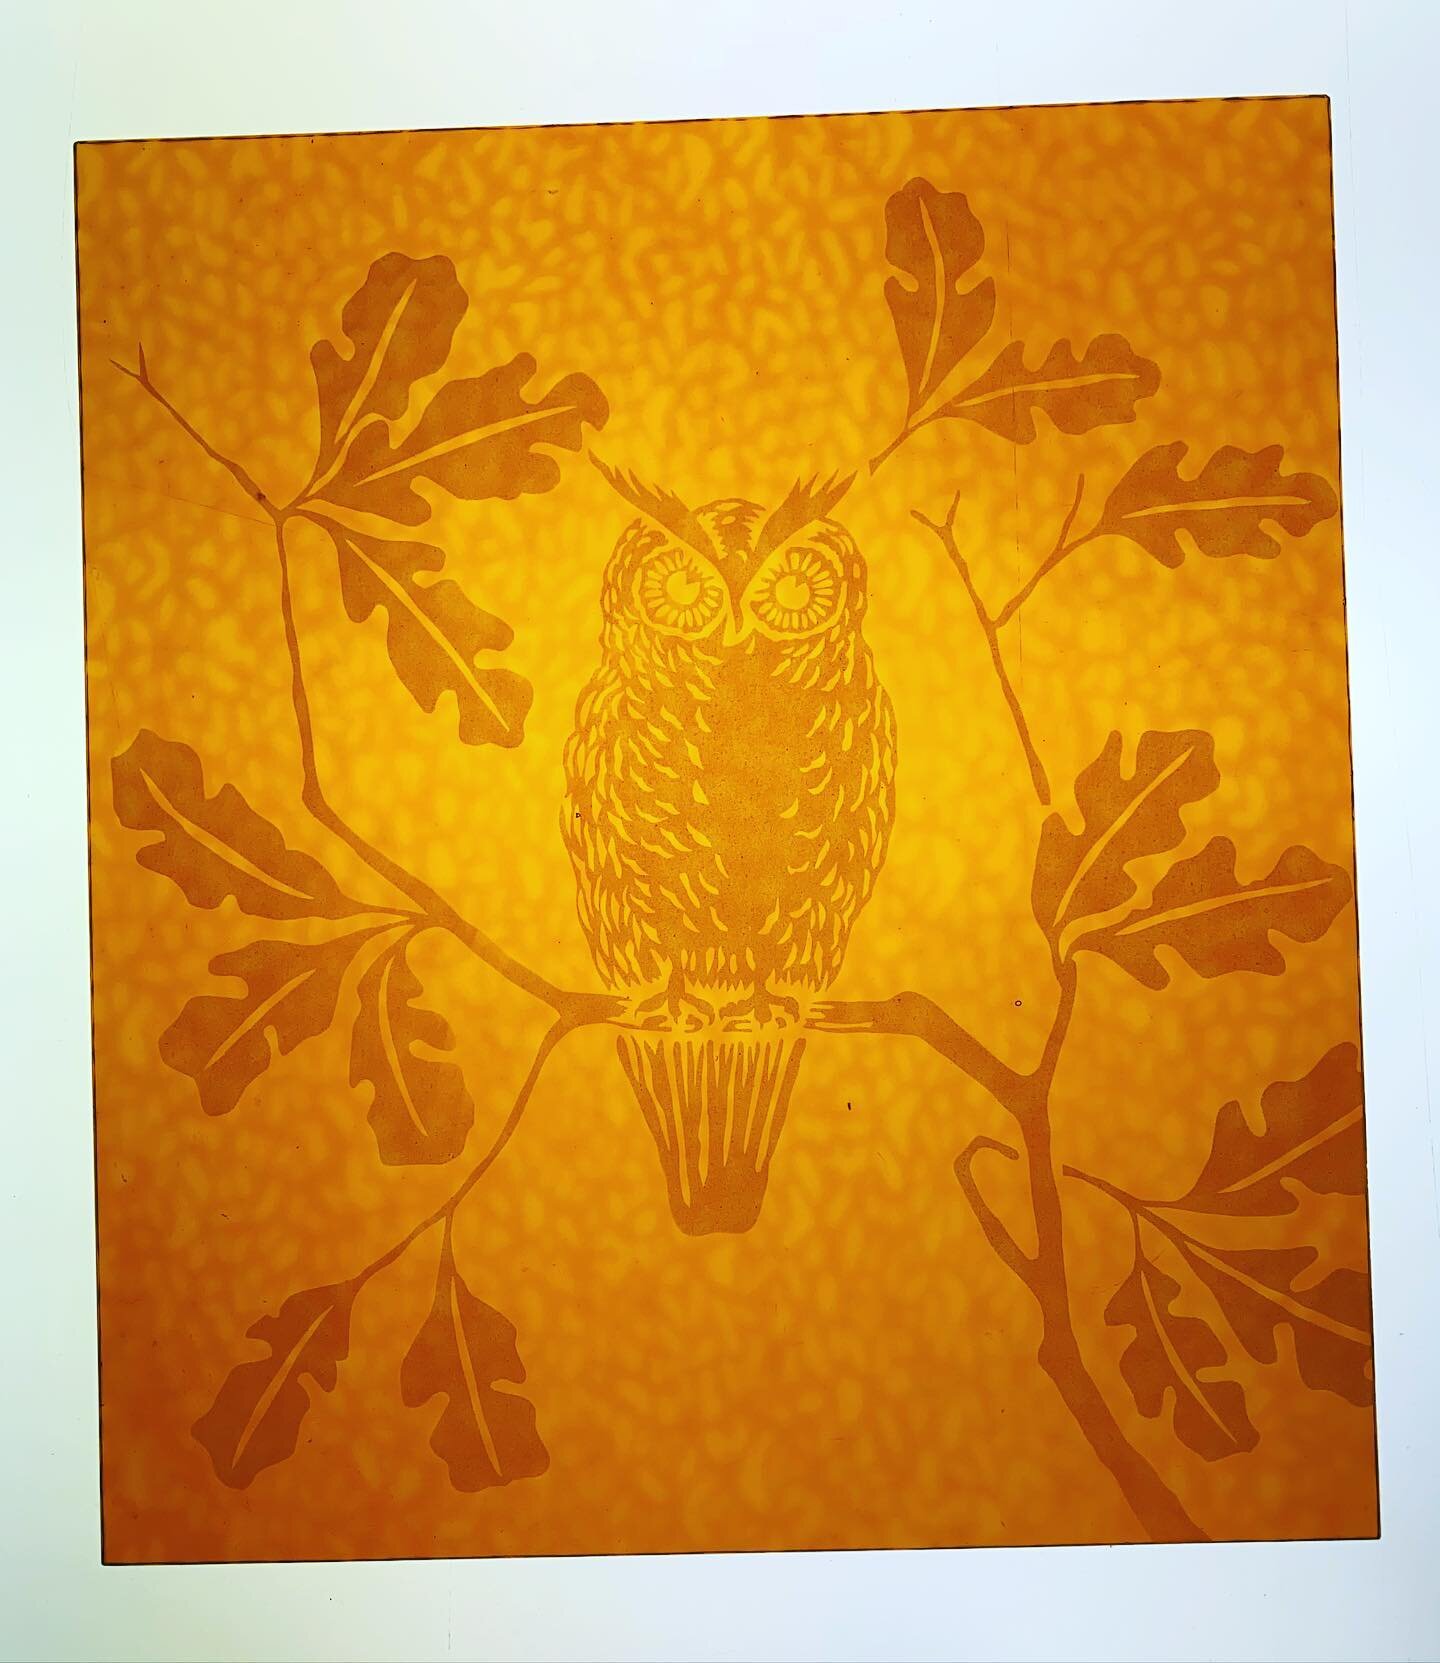 Replicated owl etching.